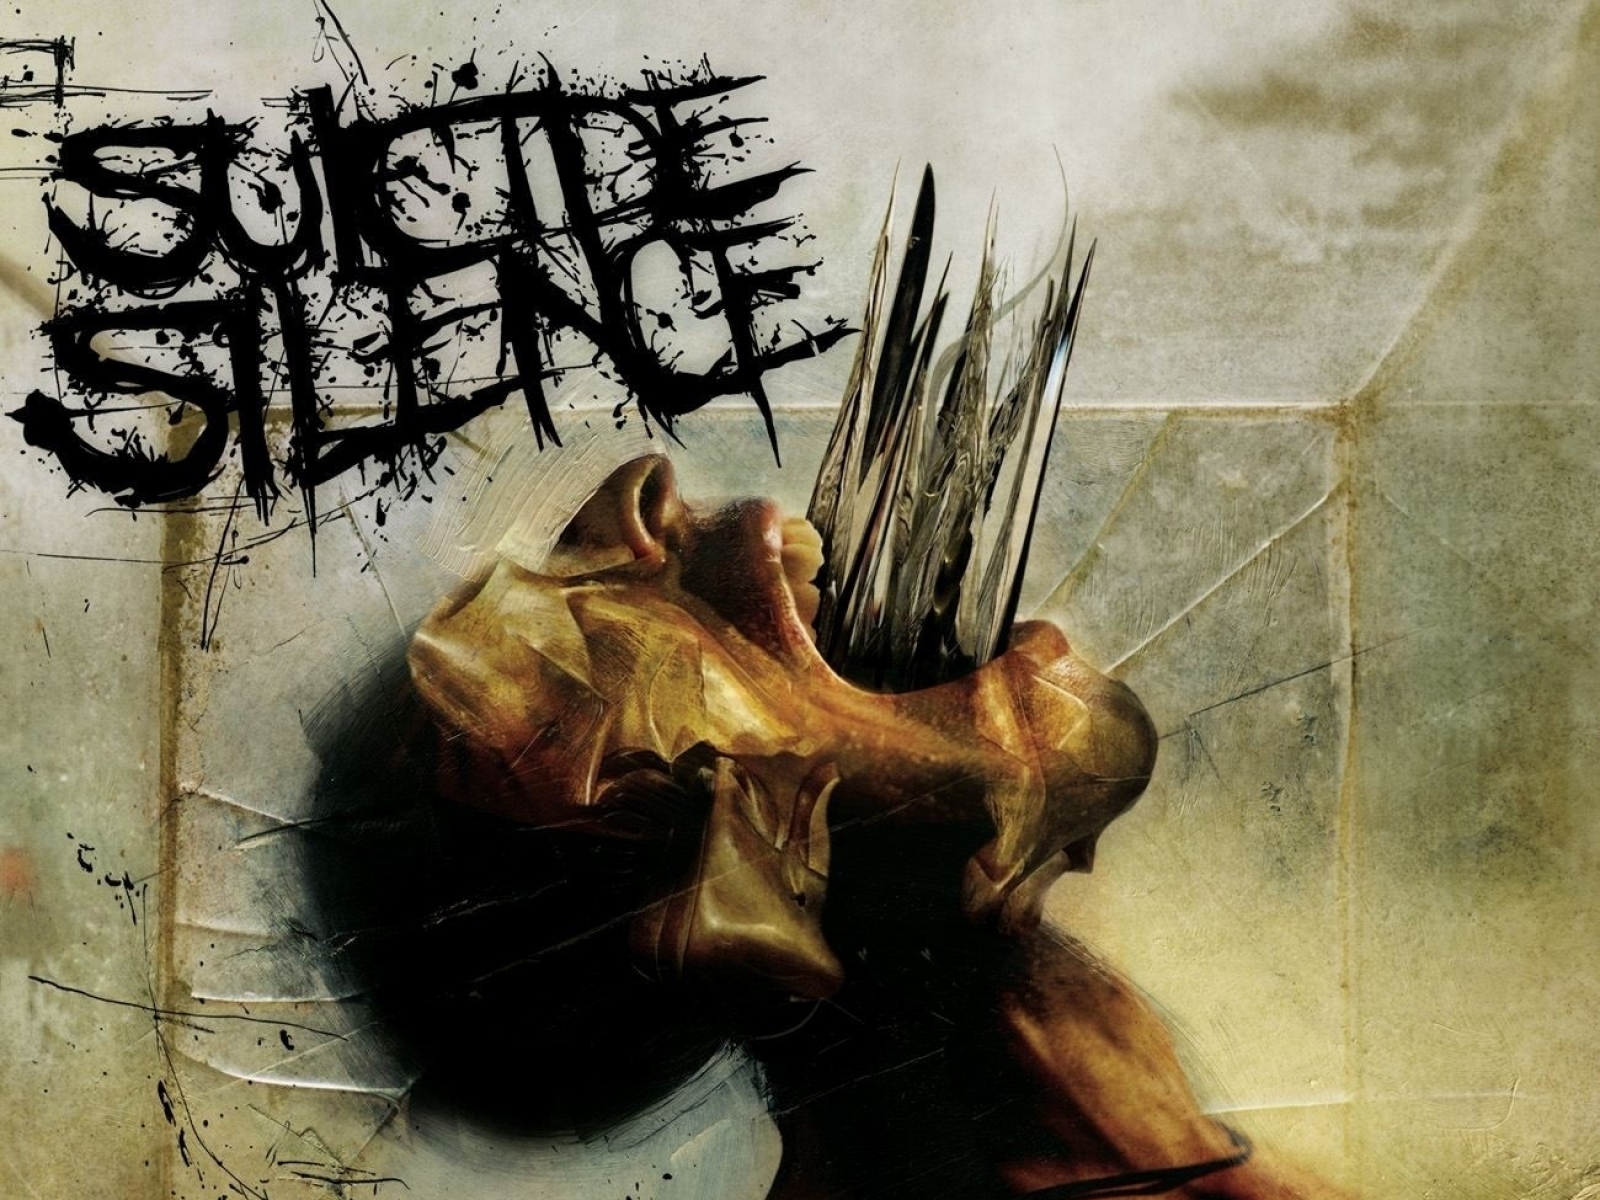 suicide silence, heavy metal, deathcore, music, hard rock cellphone